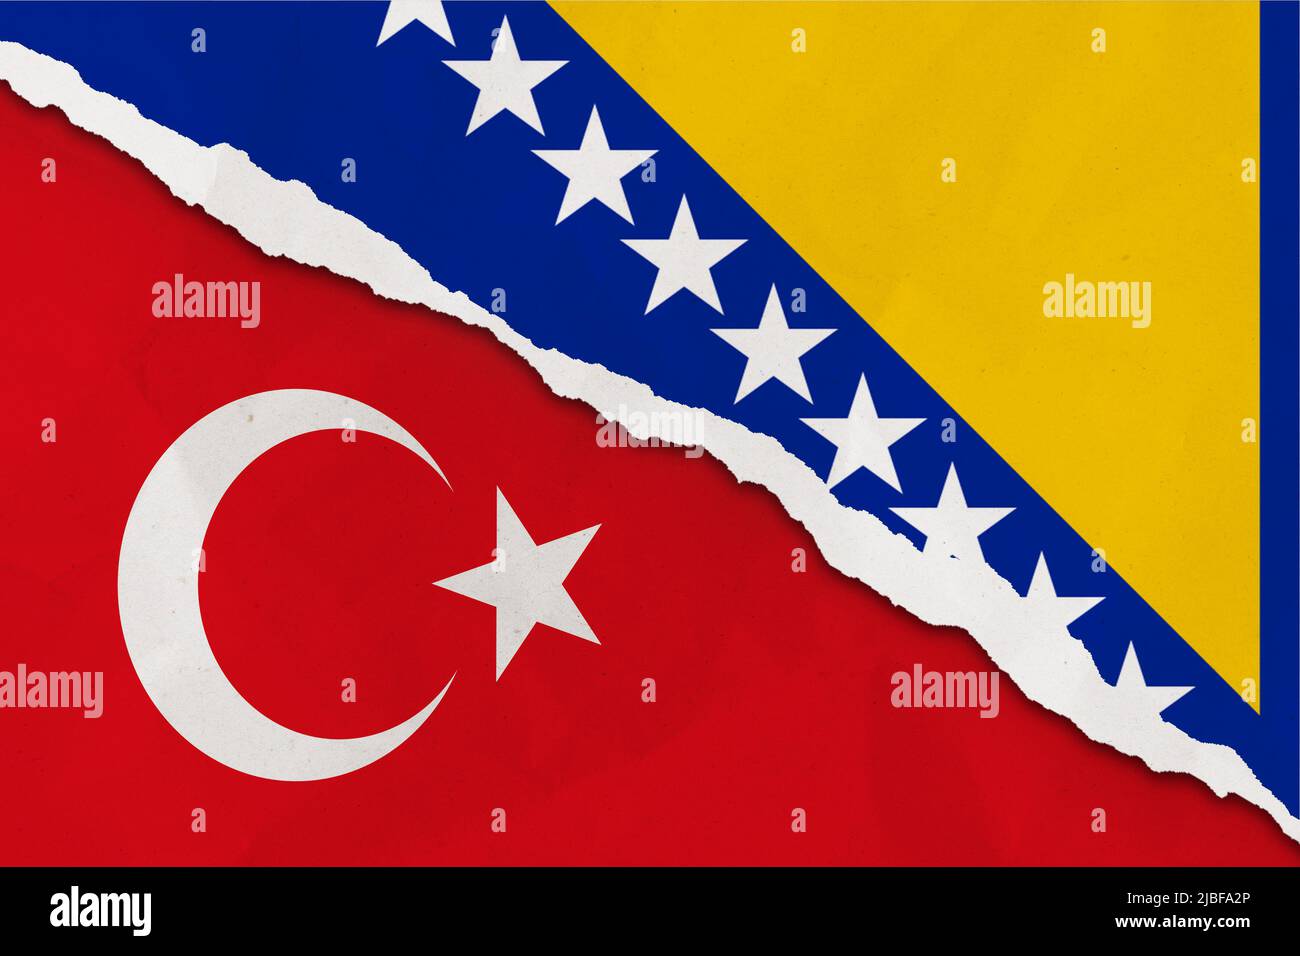 Bosnia and Herzegovina and Turkey flag ripped paper grunge background. Abstract Bosnia and Herzegovina and Turkey economics, politics conflicts, war c Stock Photo